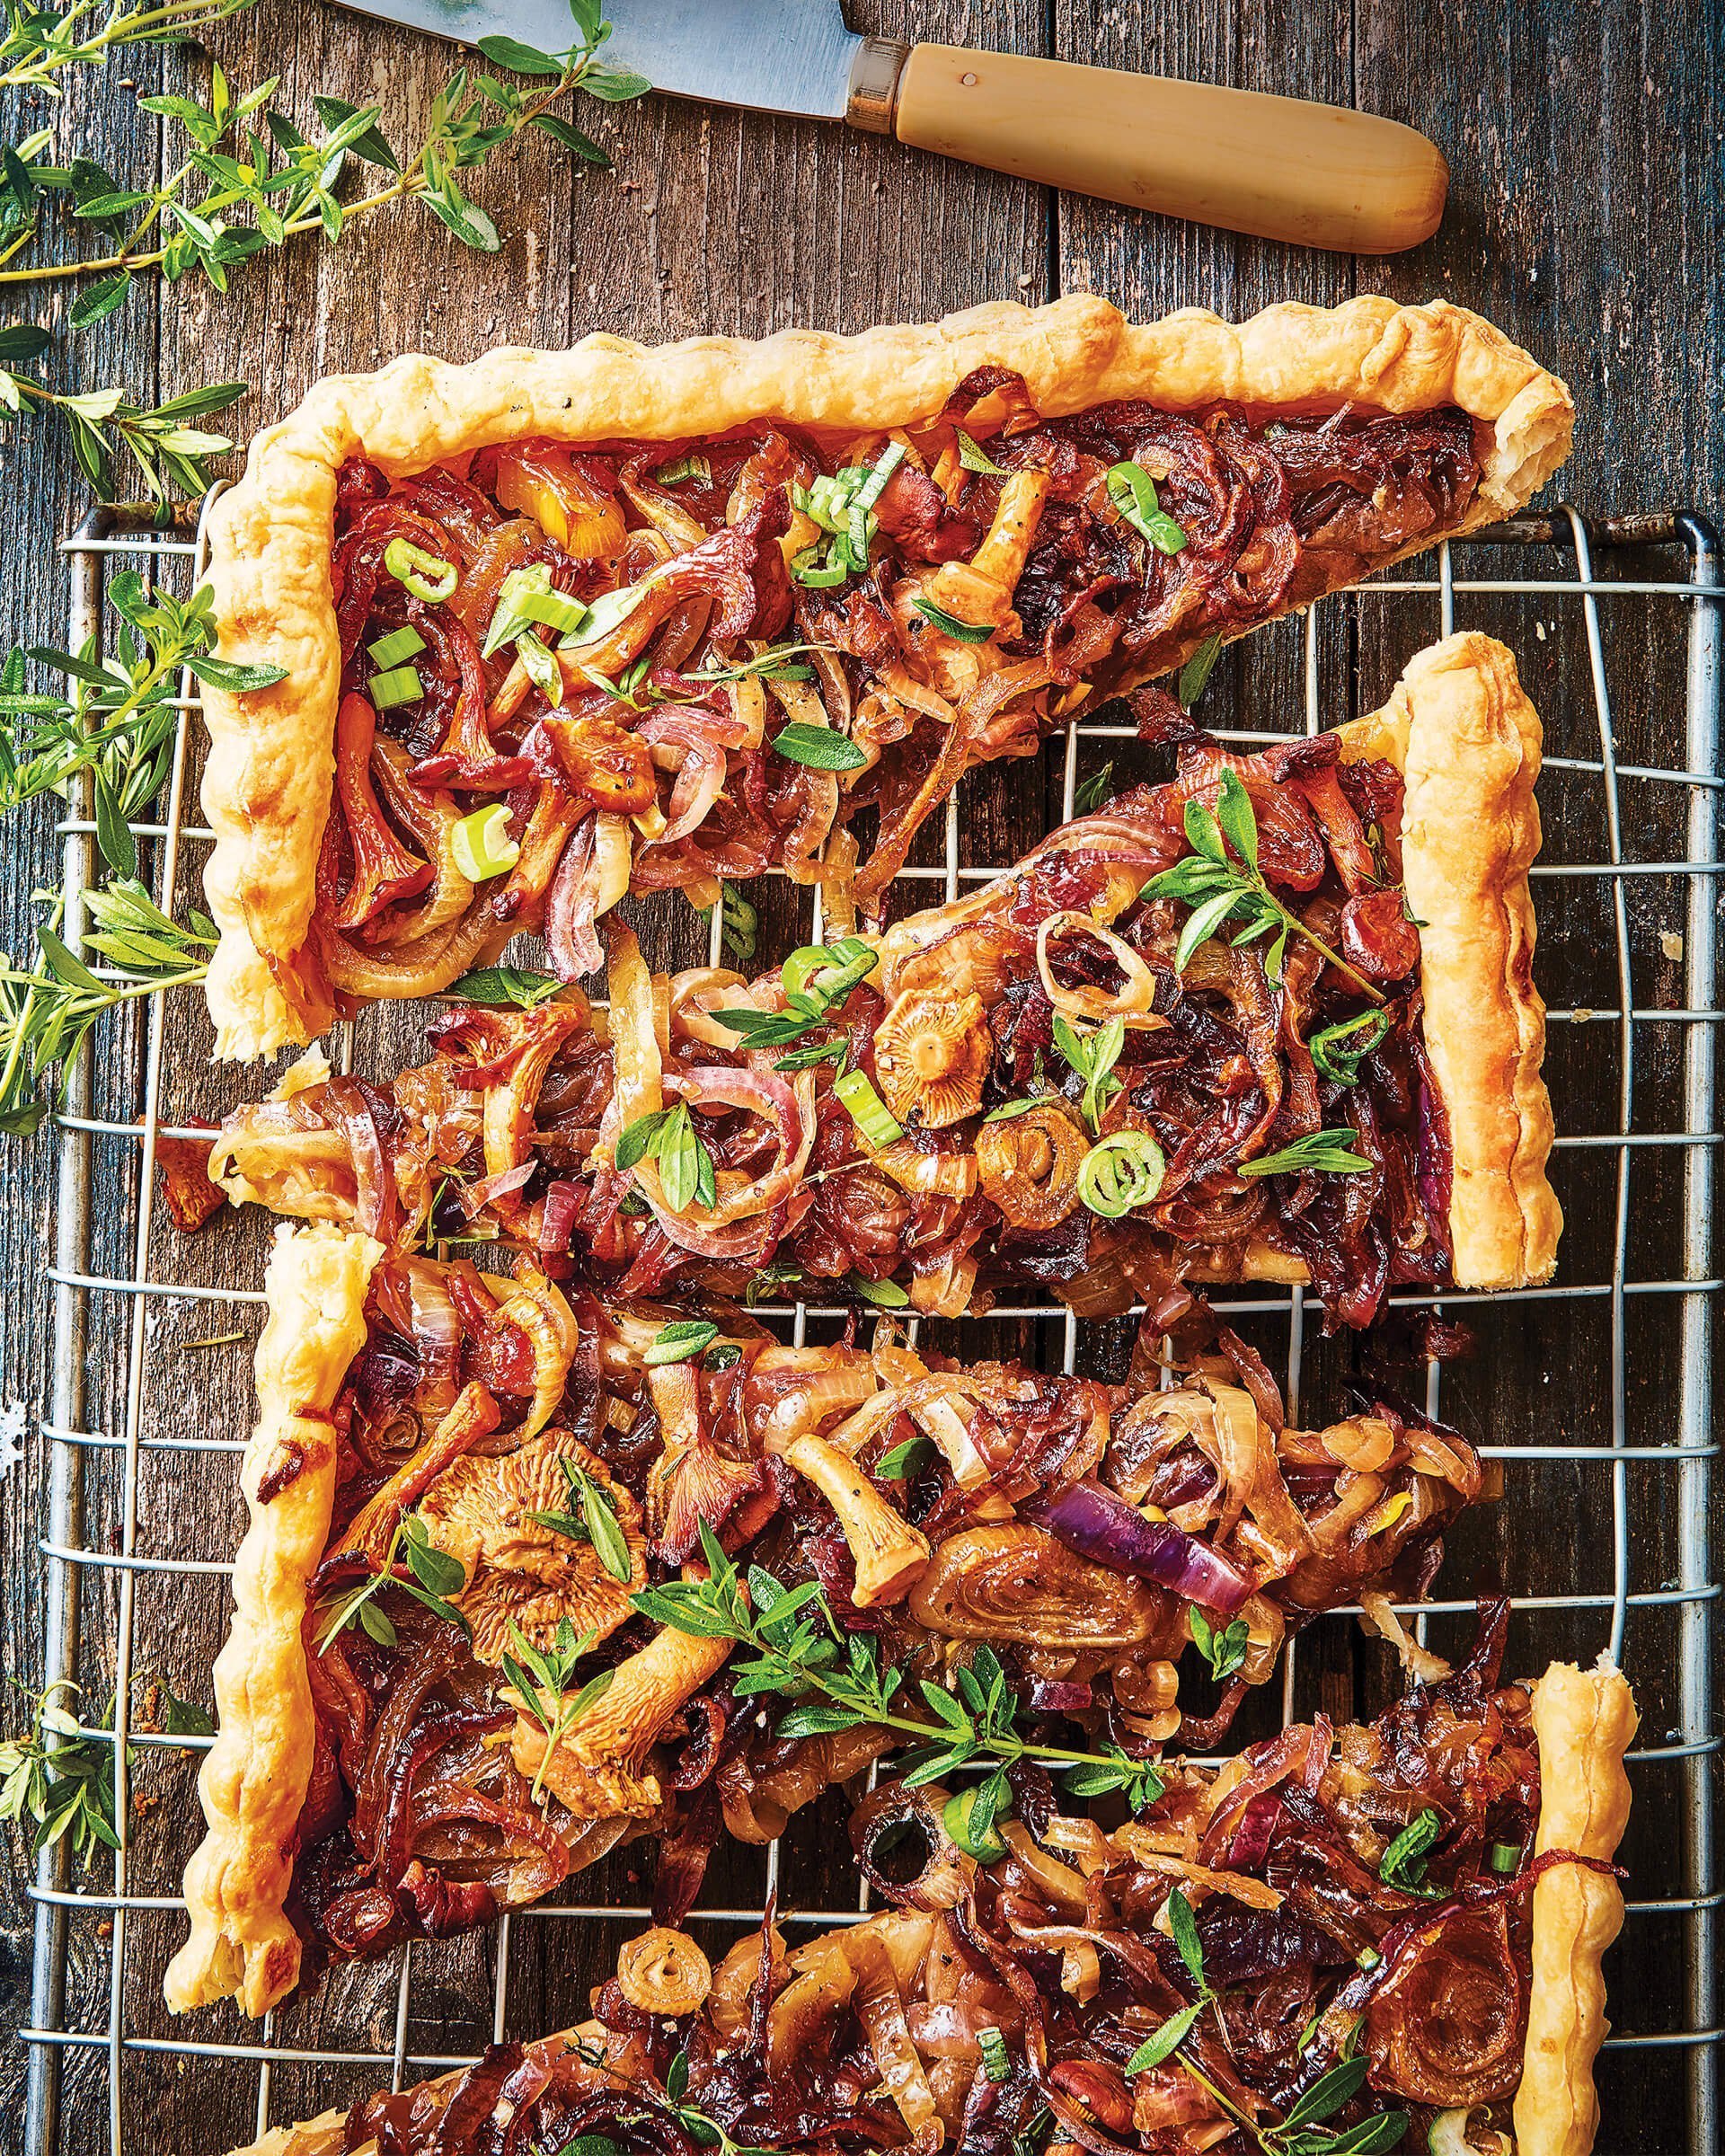 A sliced tart with onions and thyme.